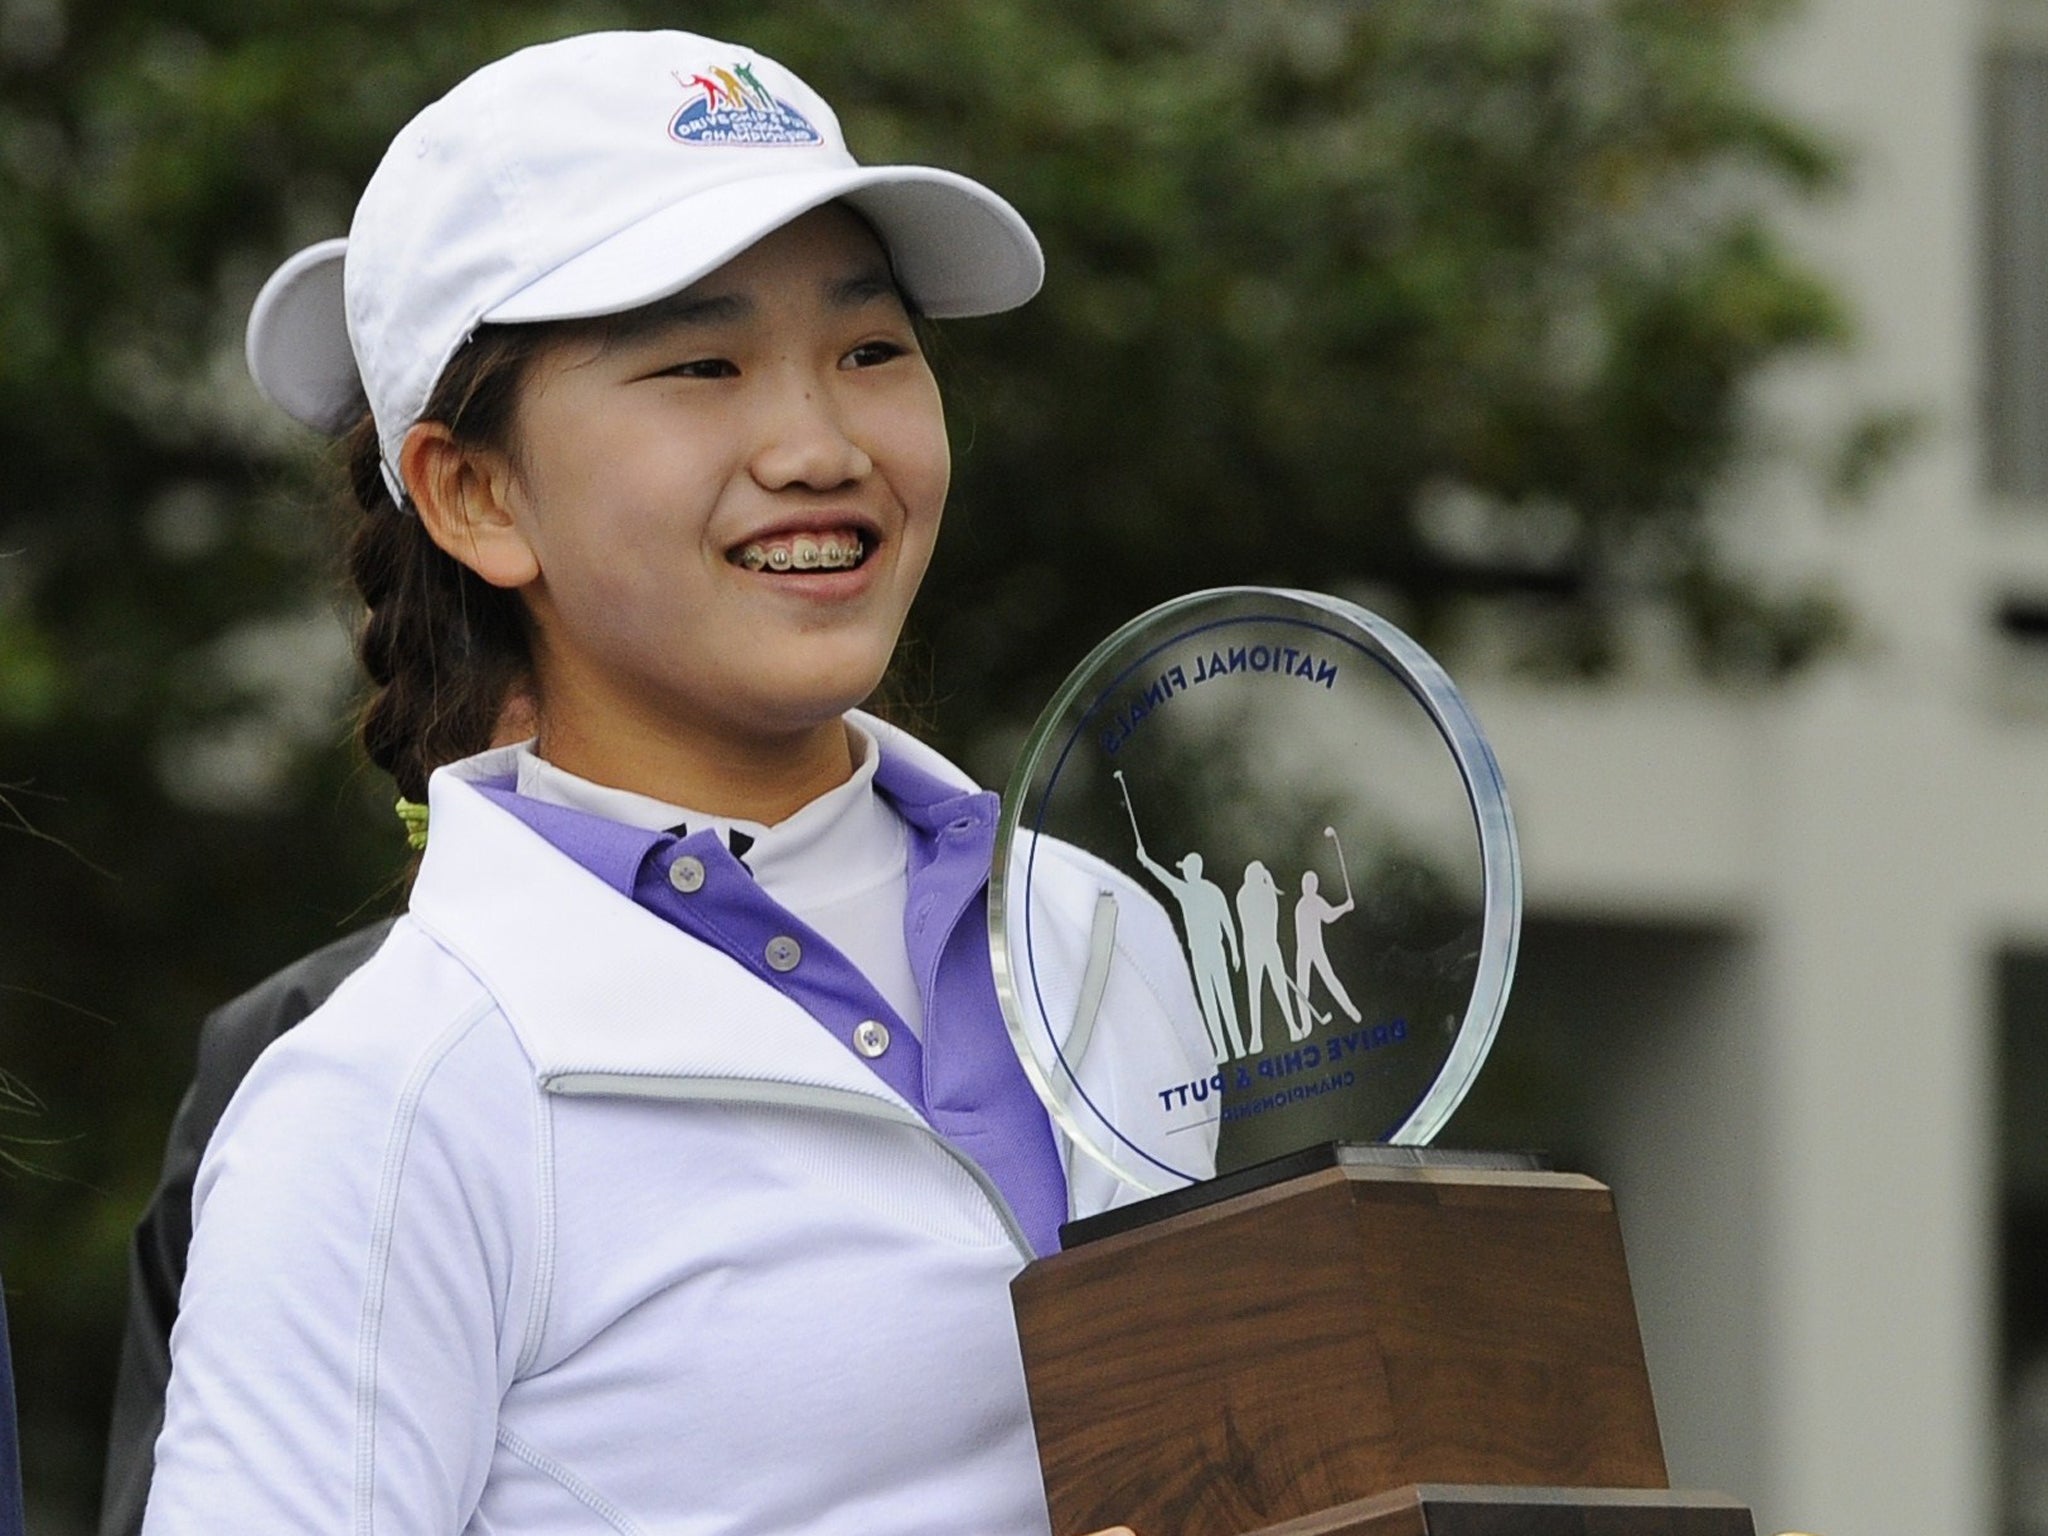 Girls 10-11 category champion Lucy Li from Redwood City, California poses with her trophy during the National Finals of the 2014 Drive, Chip and Putt Championships April 6, 2014 at Augusta National